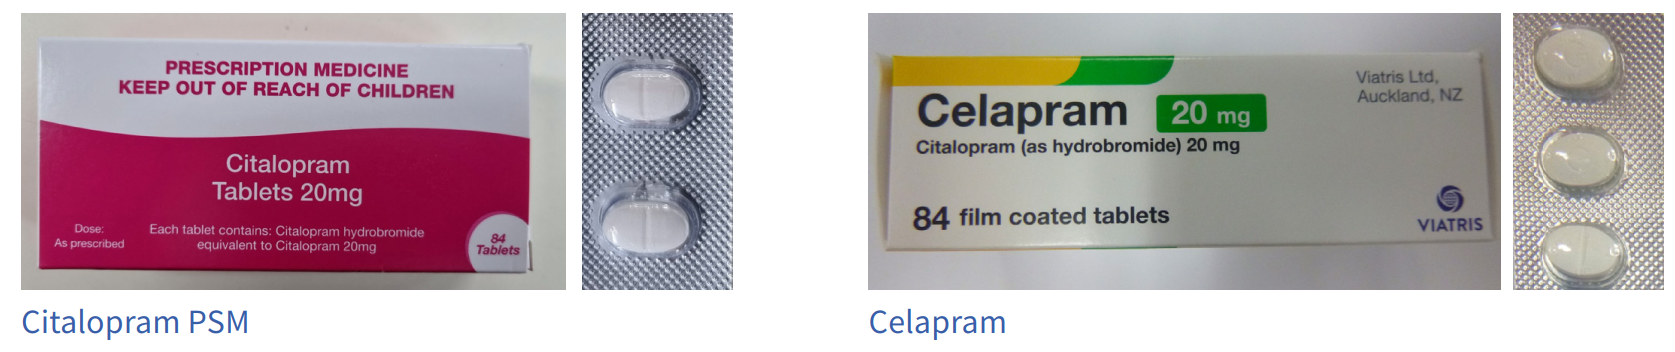 Side by side comparison of both brands of citalopram. The PSM citalopram box is mostly hot pink. The tablets are oval with a score mark. Celapram box is mostly white with some green and yellow highlights. The tablets are rounder than PSM but still slightl. 